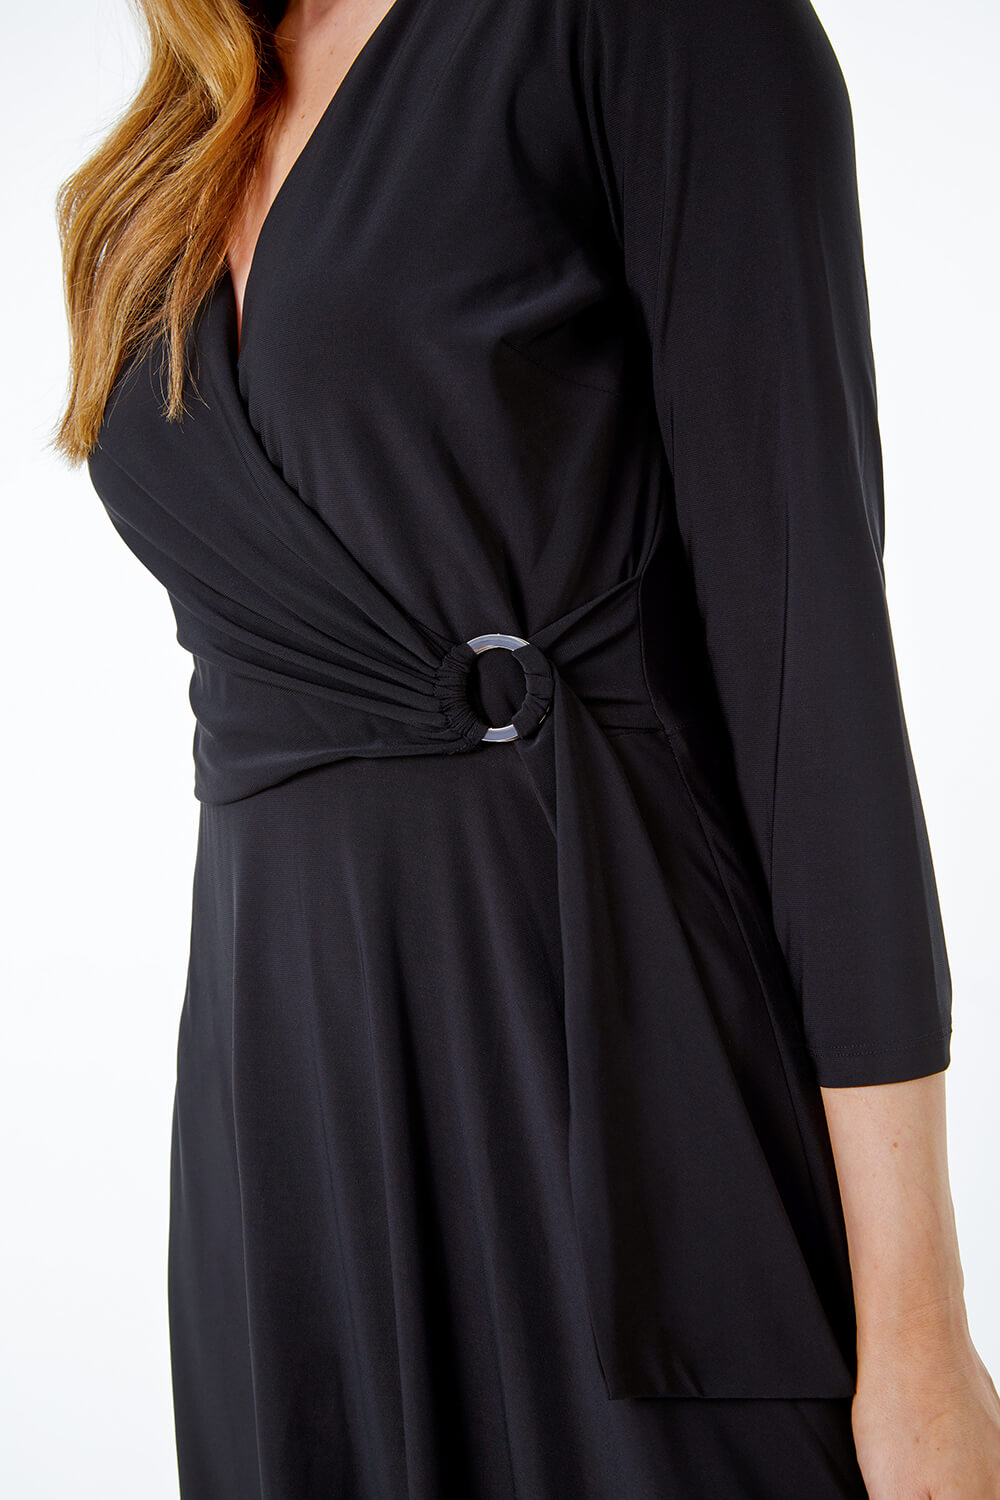 Black Ring Buckle Wrap Stretch Dress, Image 5 of 5